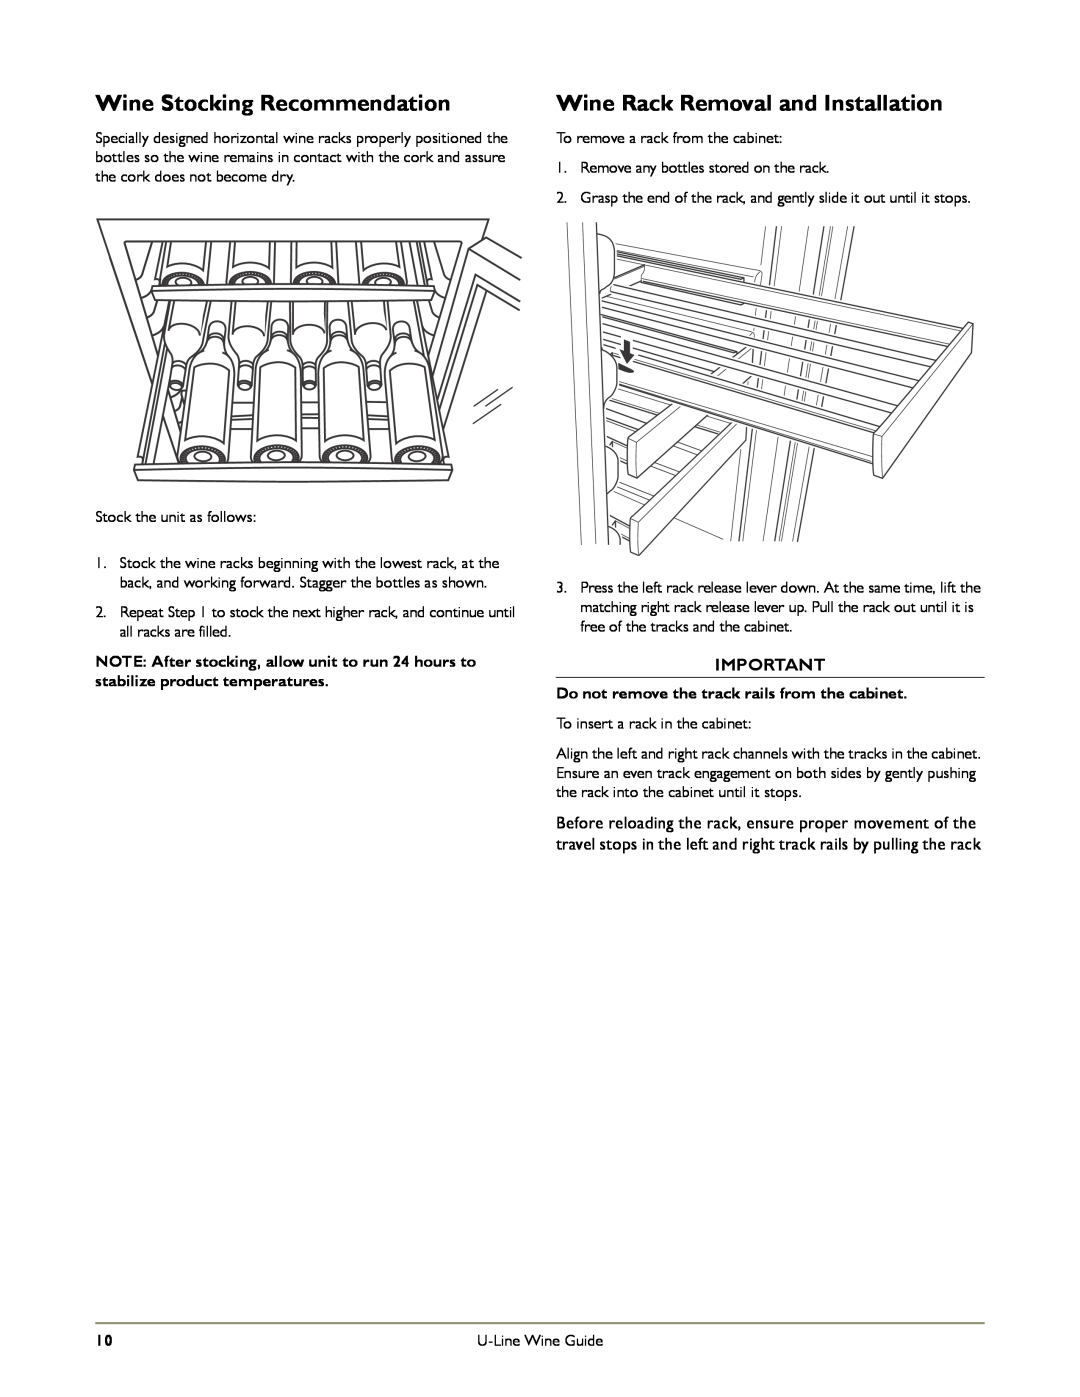 U-Line 2275ZWCOL manual Wine Stocking Recommendation, Wine Rack Removal and Installation 